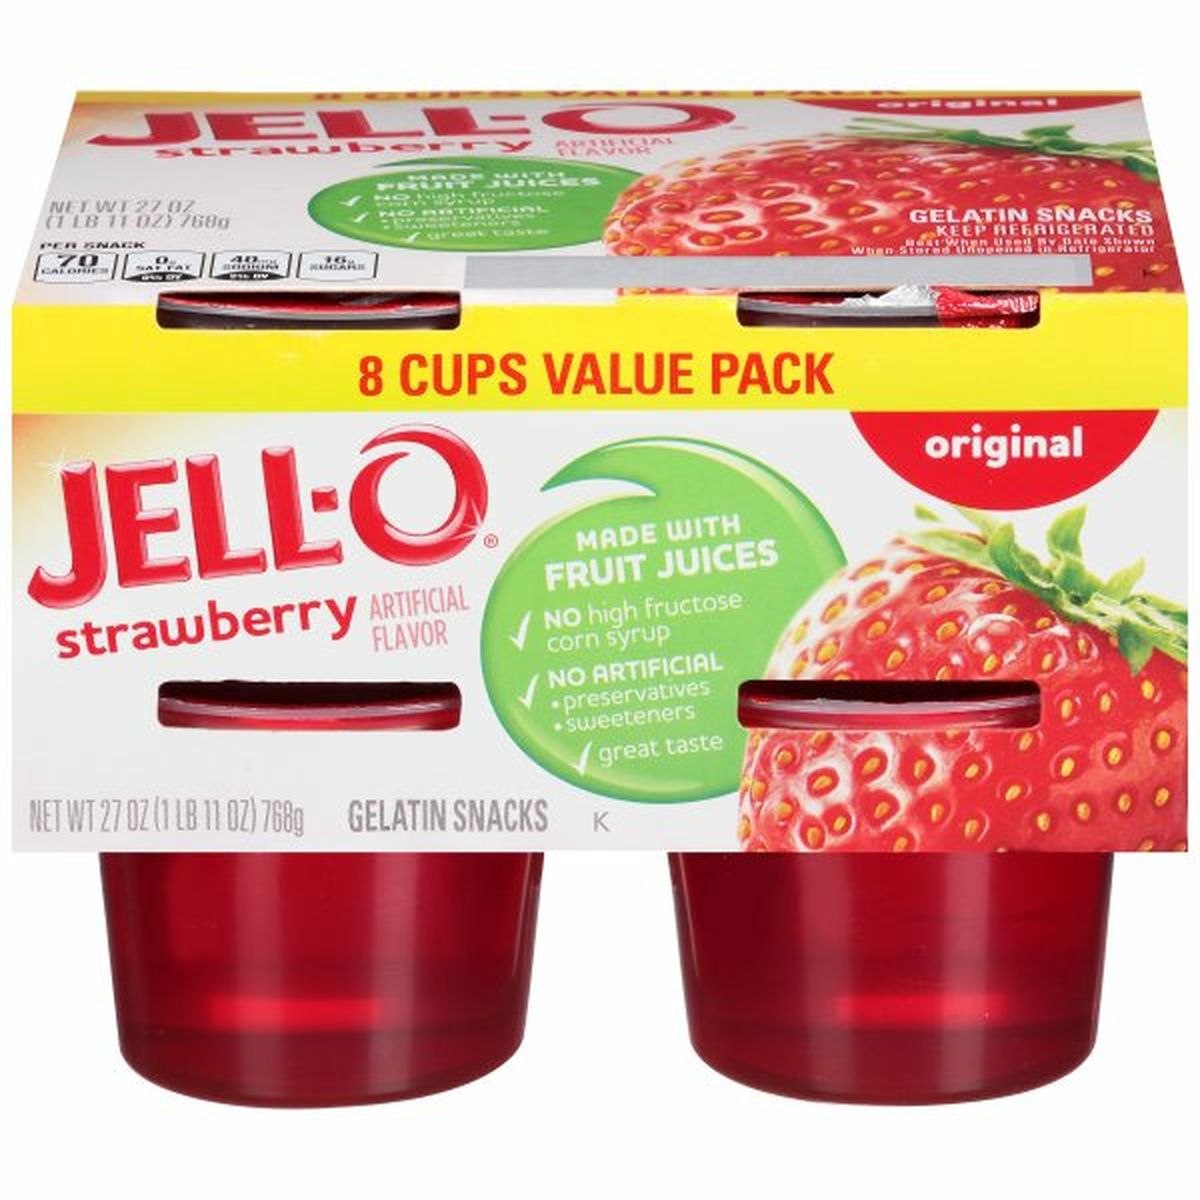 Calories in Jell-O Ready-to-Eat Strawberry Gelatin